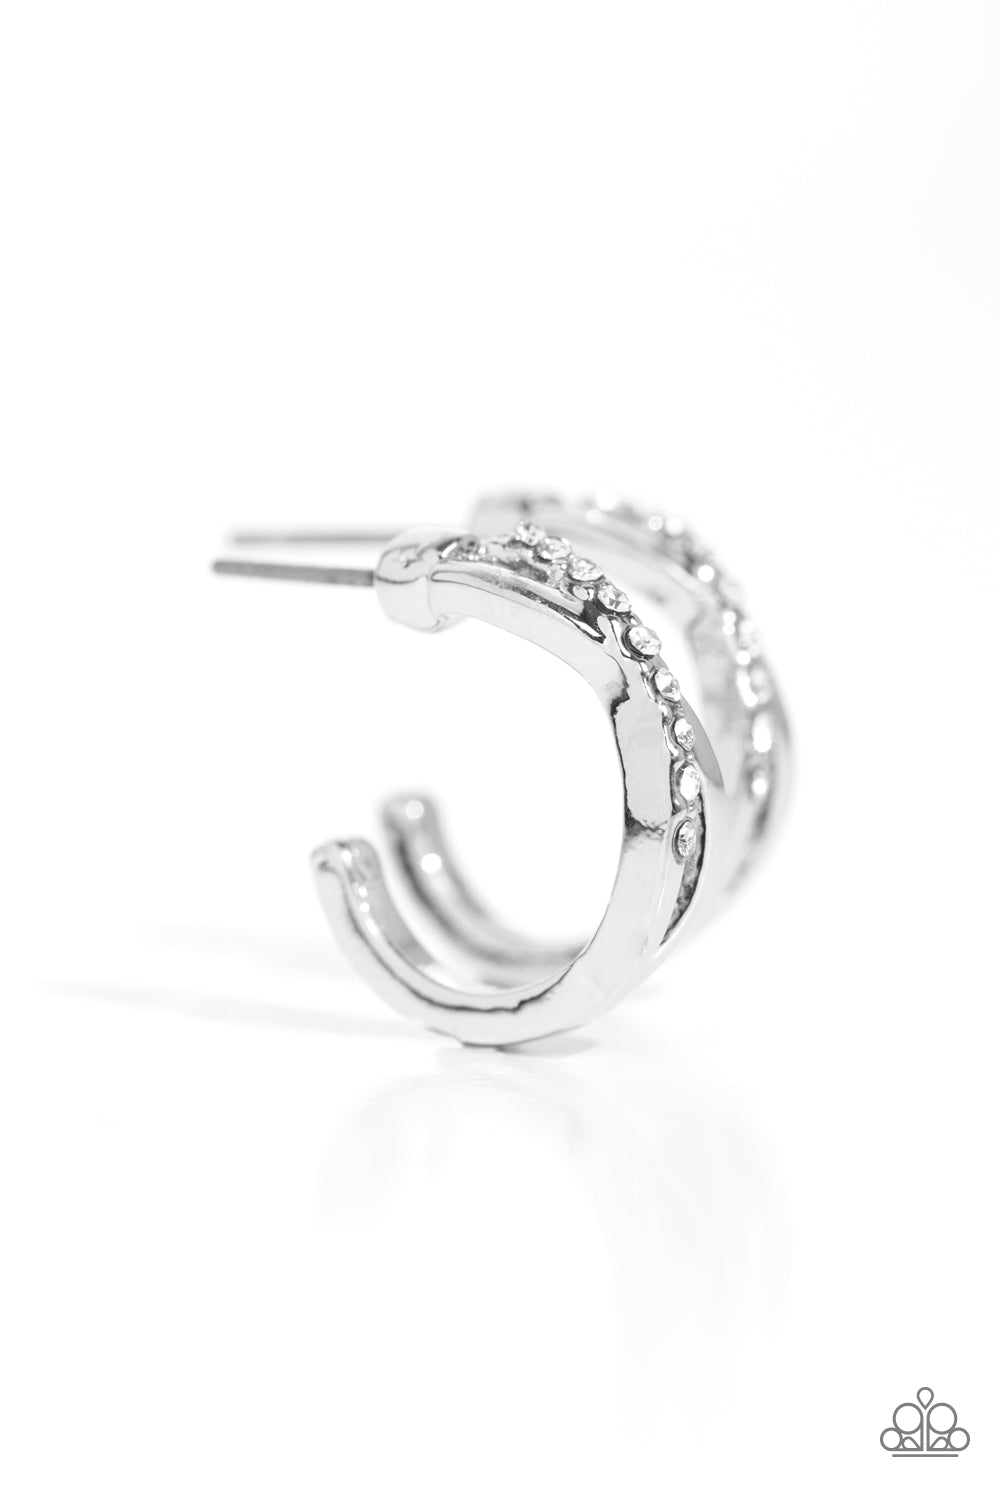 Horoscopic Helixes White Infinity Hoop Earrings - Paparazzi Accessories- lightbox - CarasShop.com - $5 Jewelry by Cara Jewels